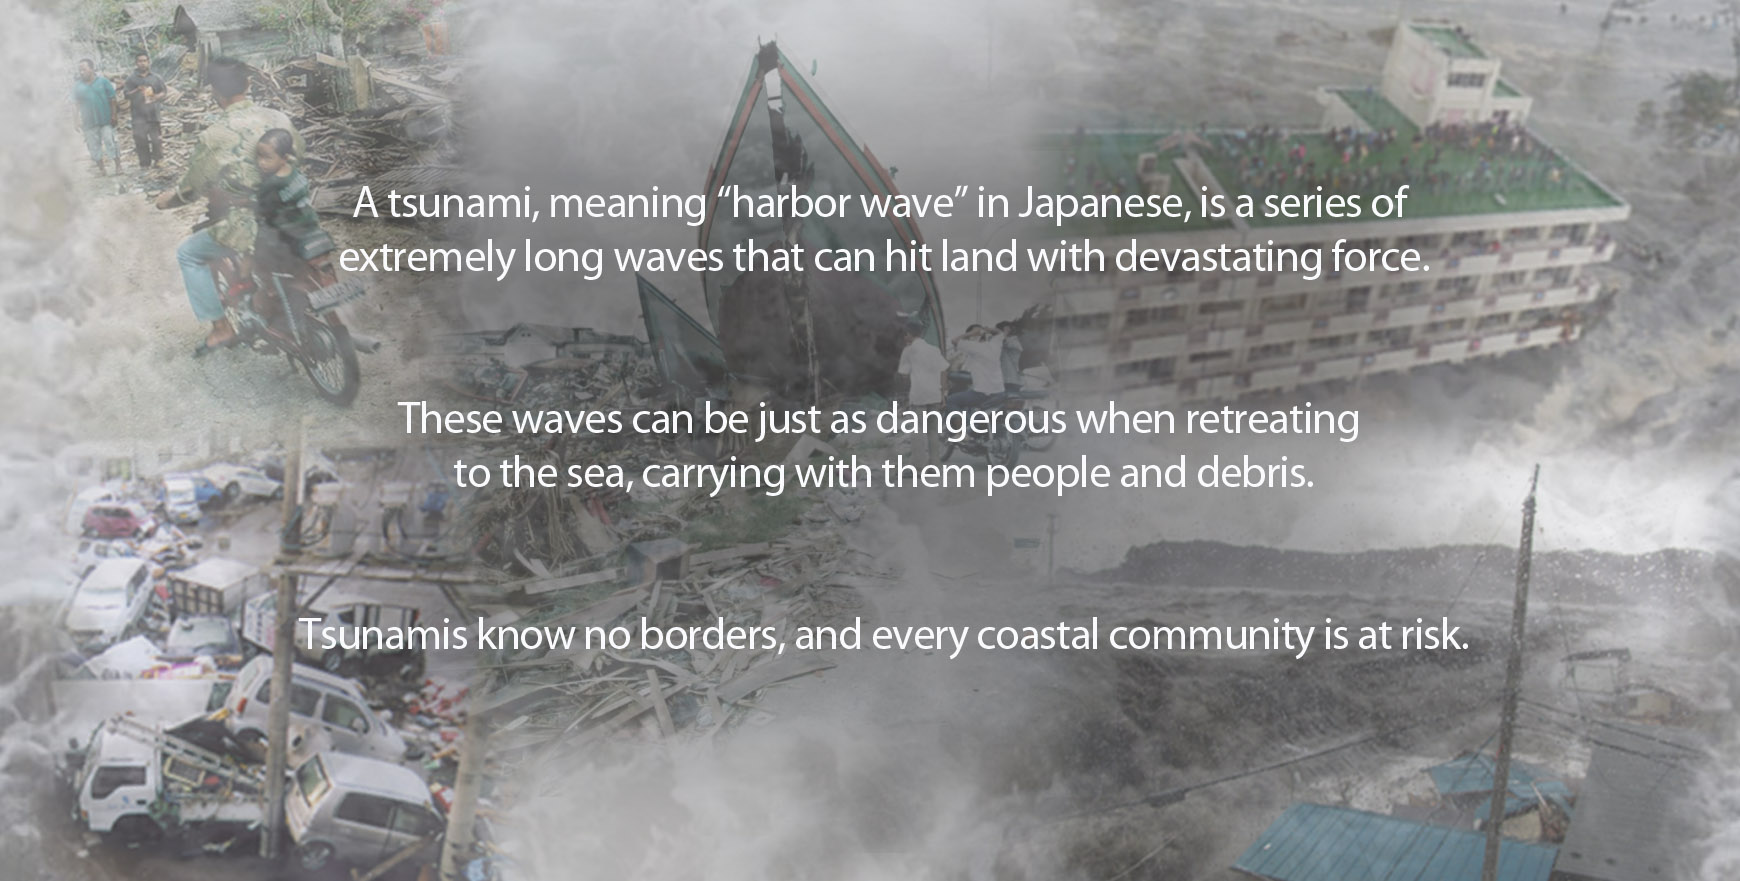 Tsunami story map destruction montage. A tsunami, meaning “harbor wave” in Japanese, is a series of 
extremely long waves that can hit land with devastating force.These waves can be just as dangerous when retreating to the sea, carrying with them people and debris. Tsunamis know no borders, and every coastal community is at risk.